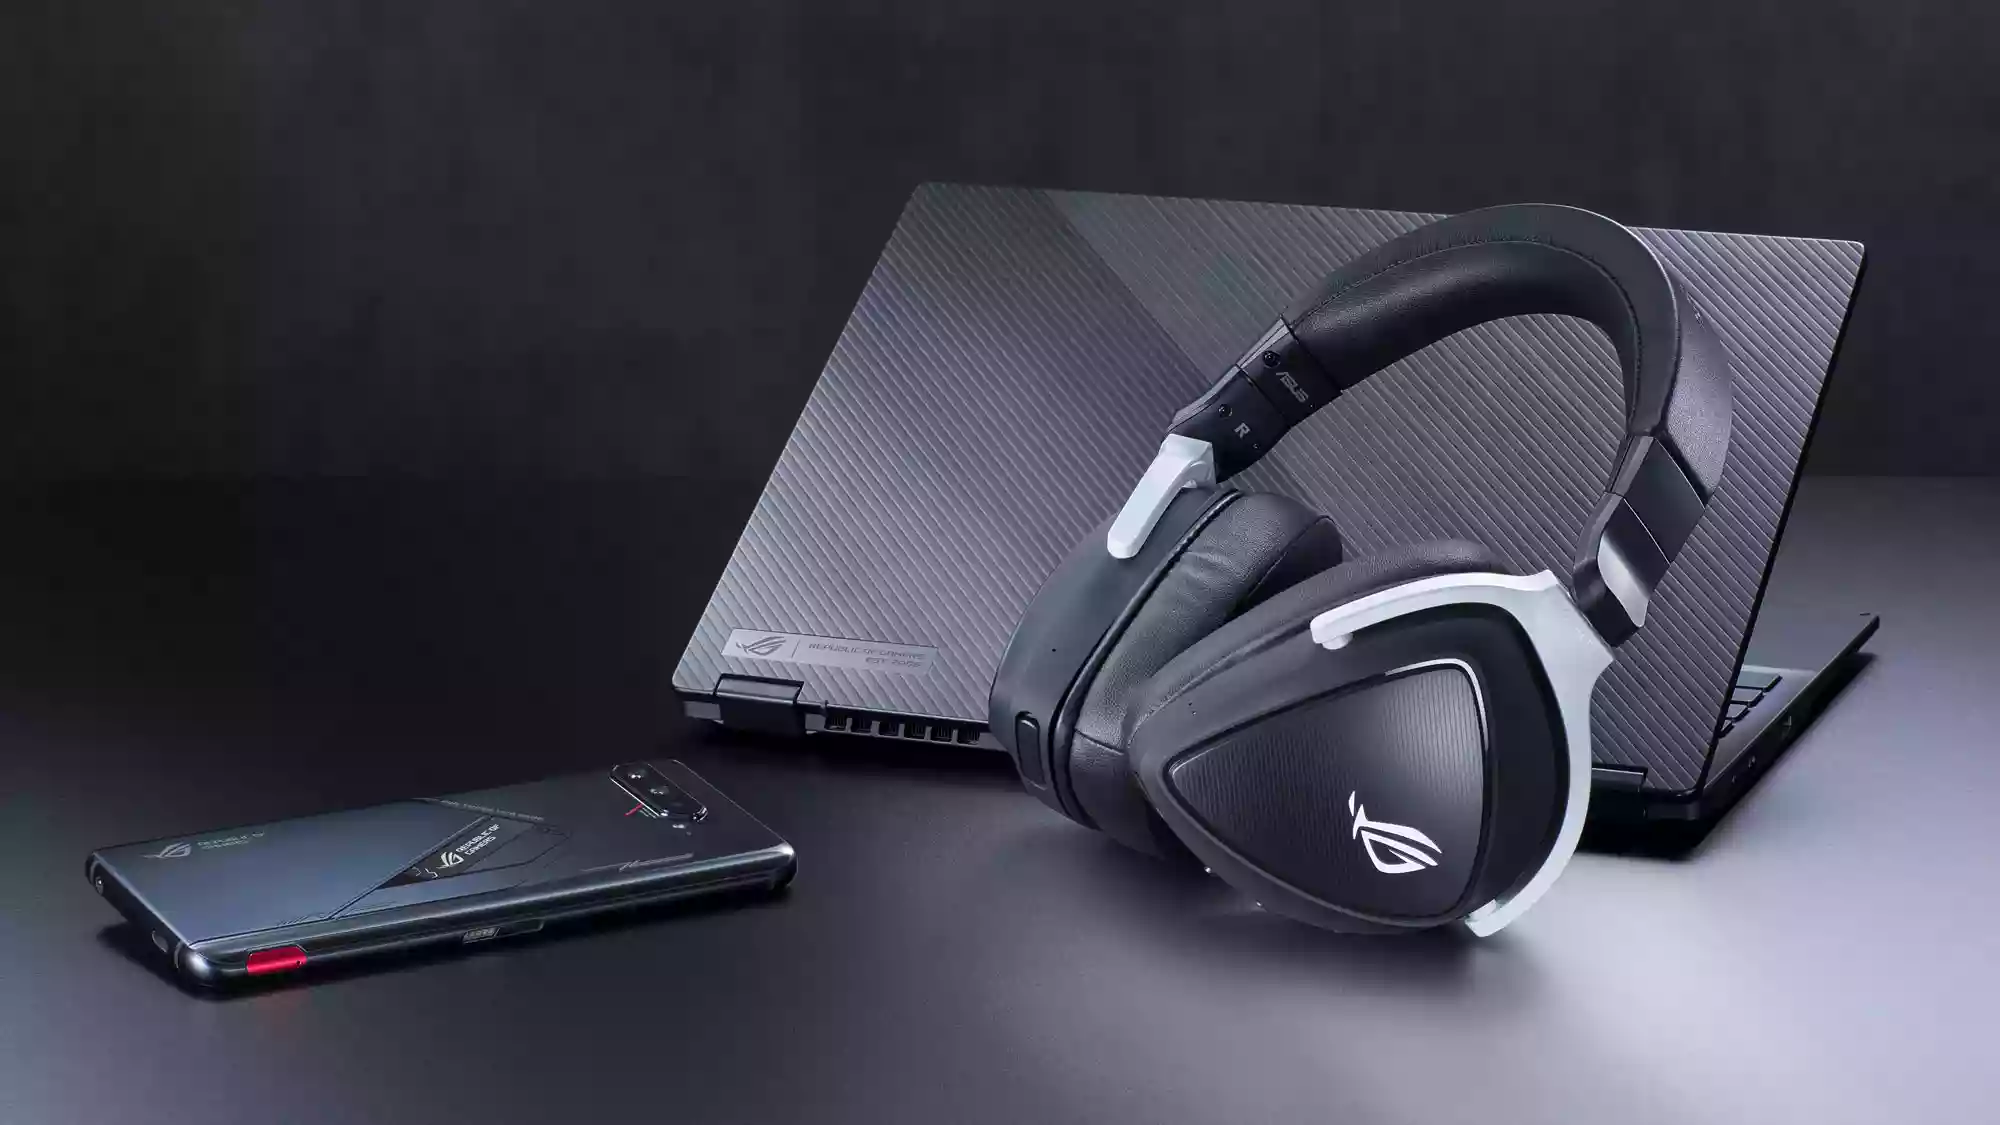 A photo of the ROG Delta S Wireless headset lying next to an ROG Flow X13 laptop and ROG Phone.